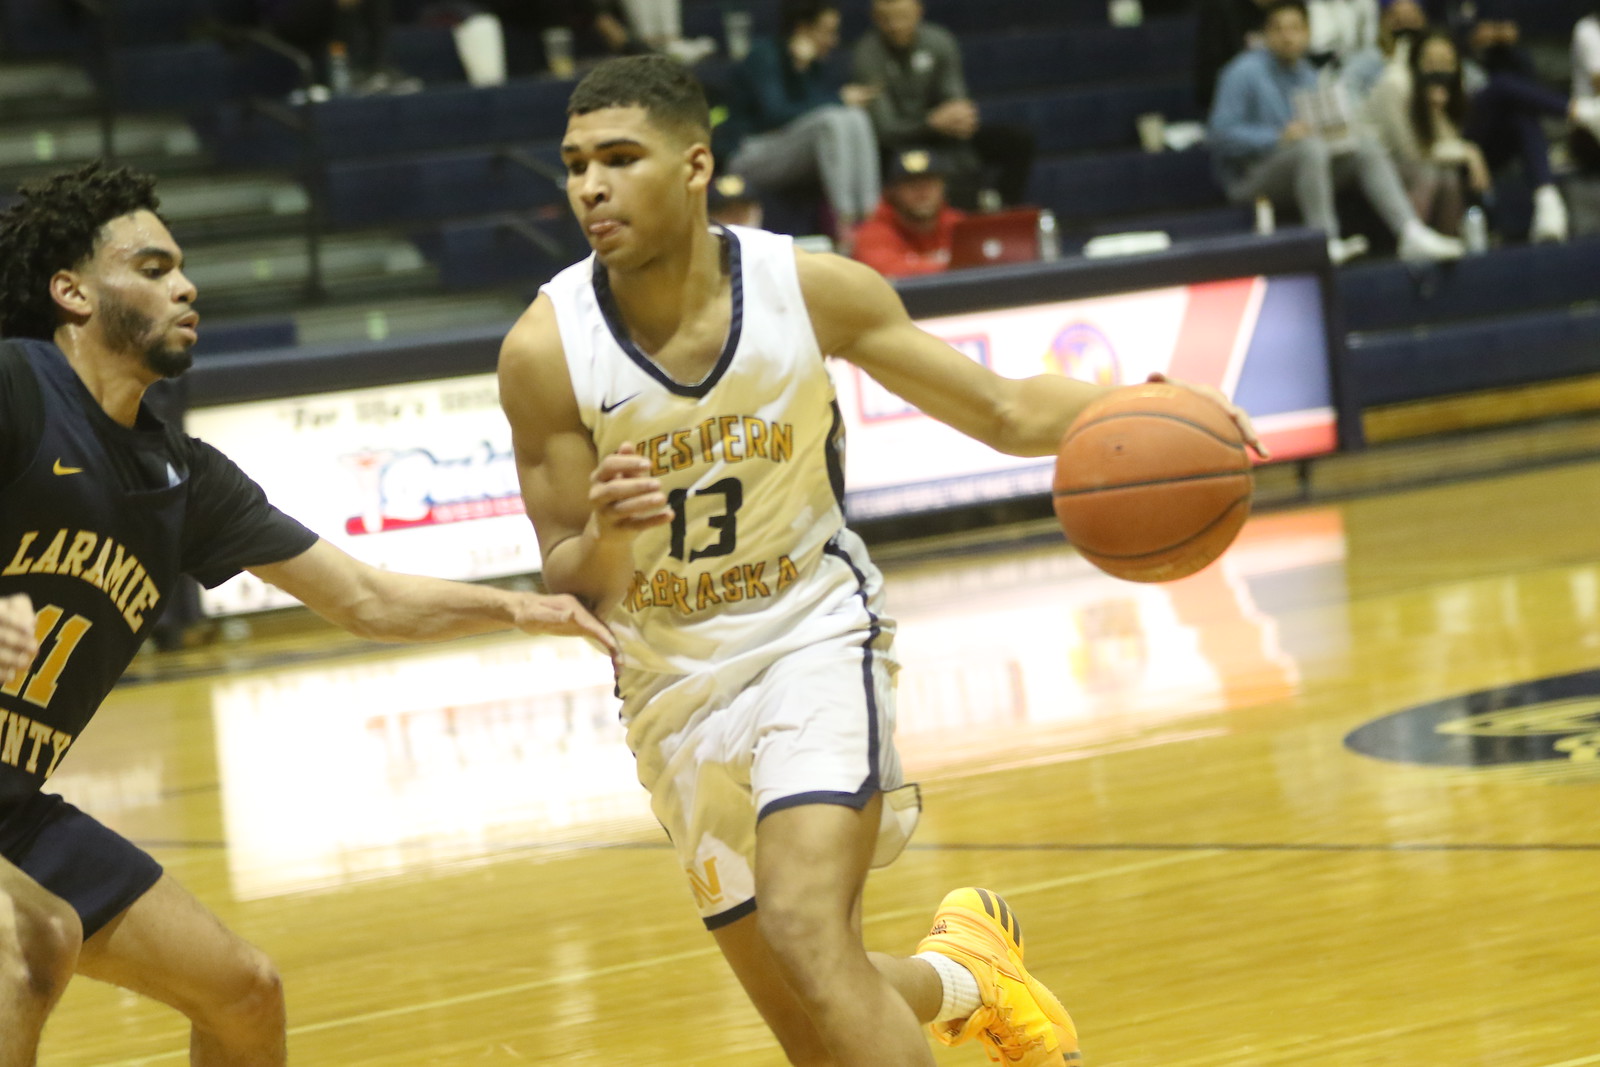 Late free throws give WNCC win over LCCC